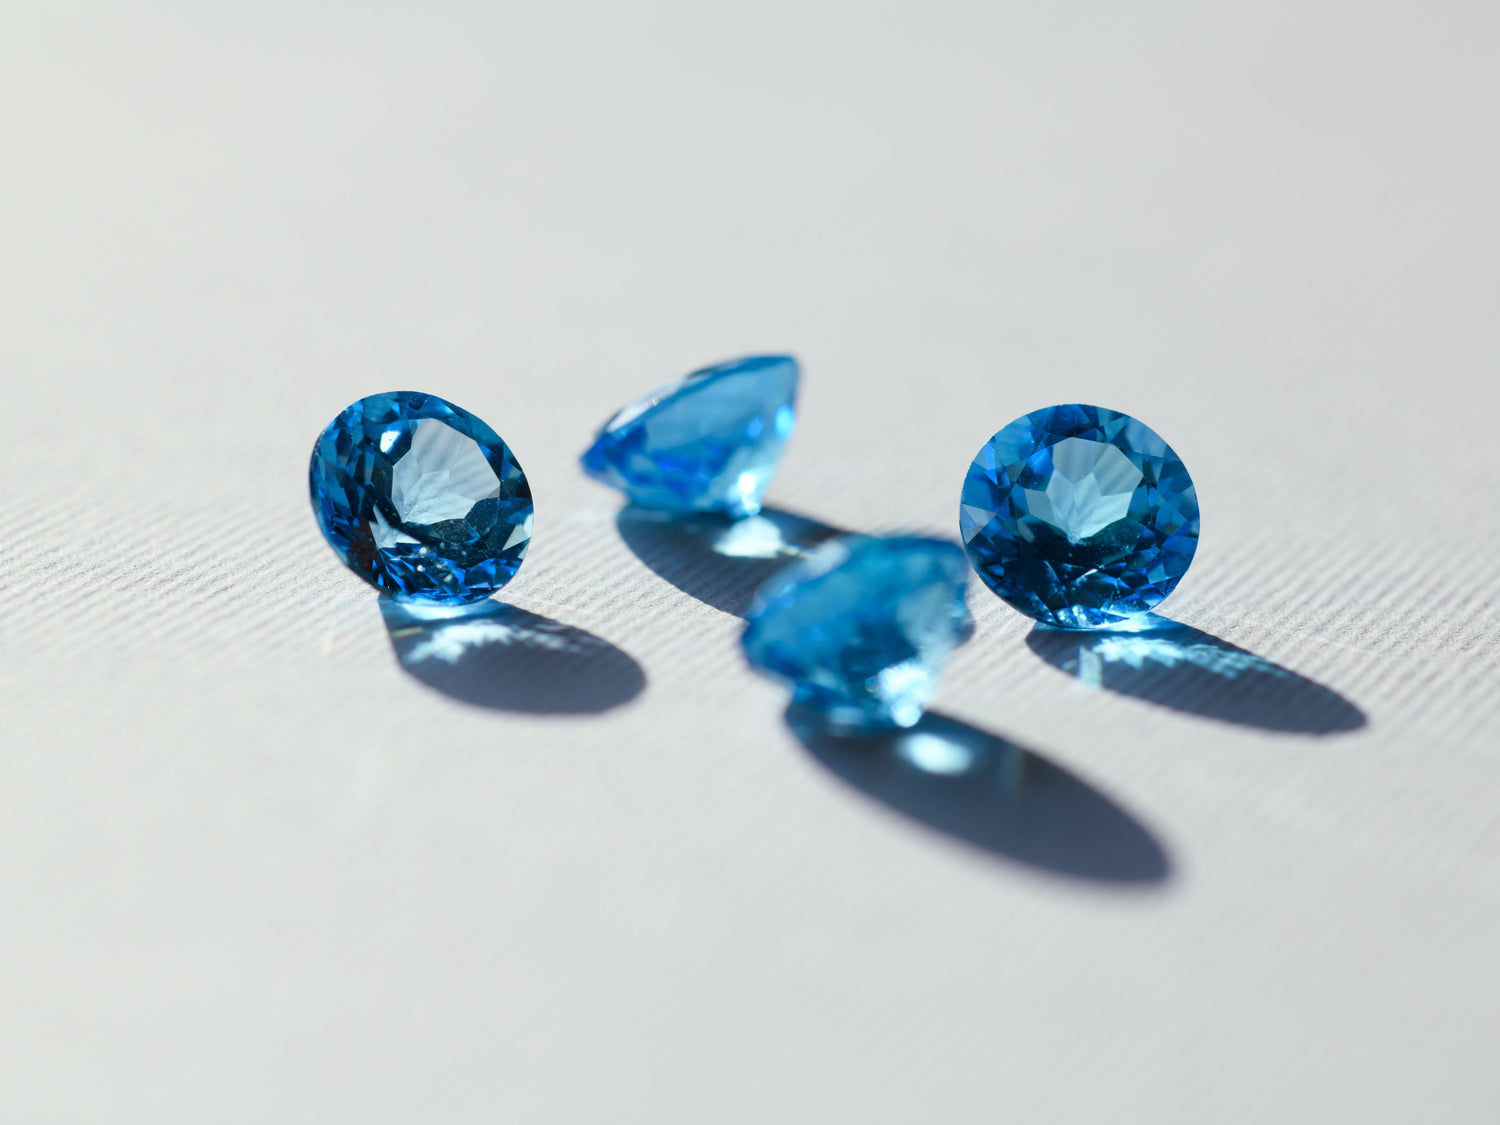 Cut and polished Blue Sapphires (Neelam stone)